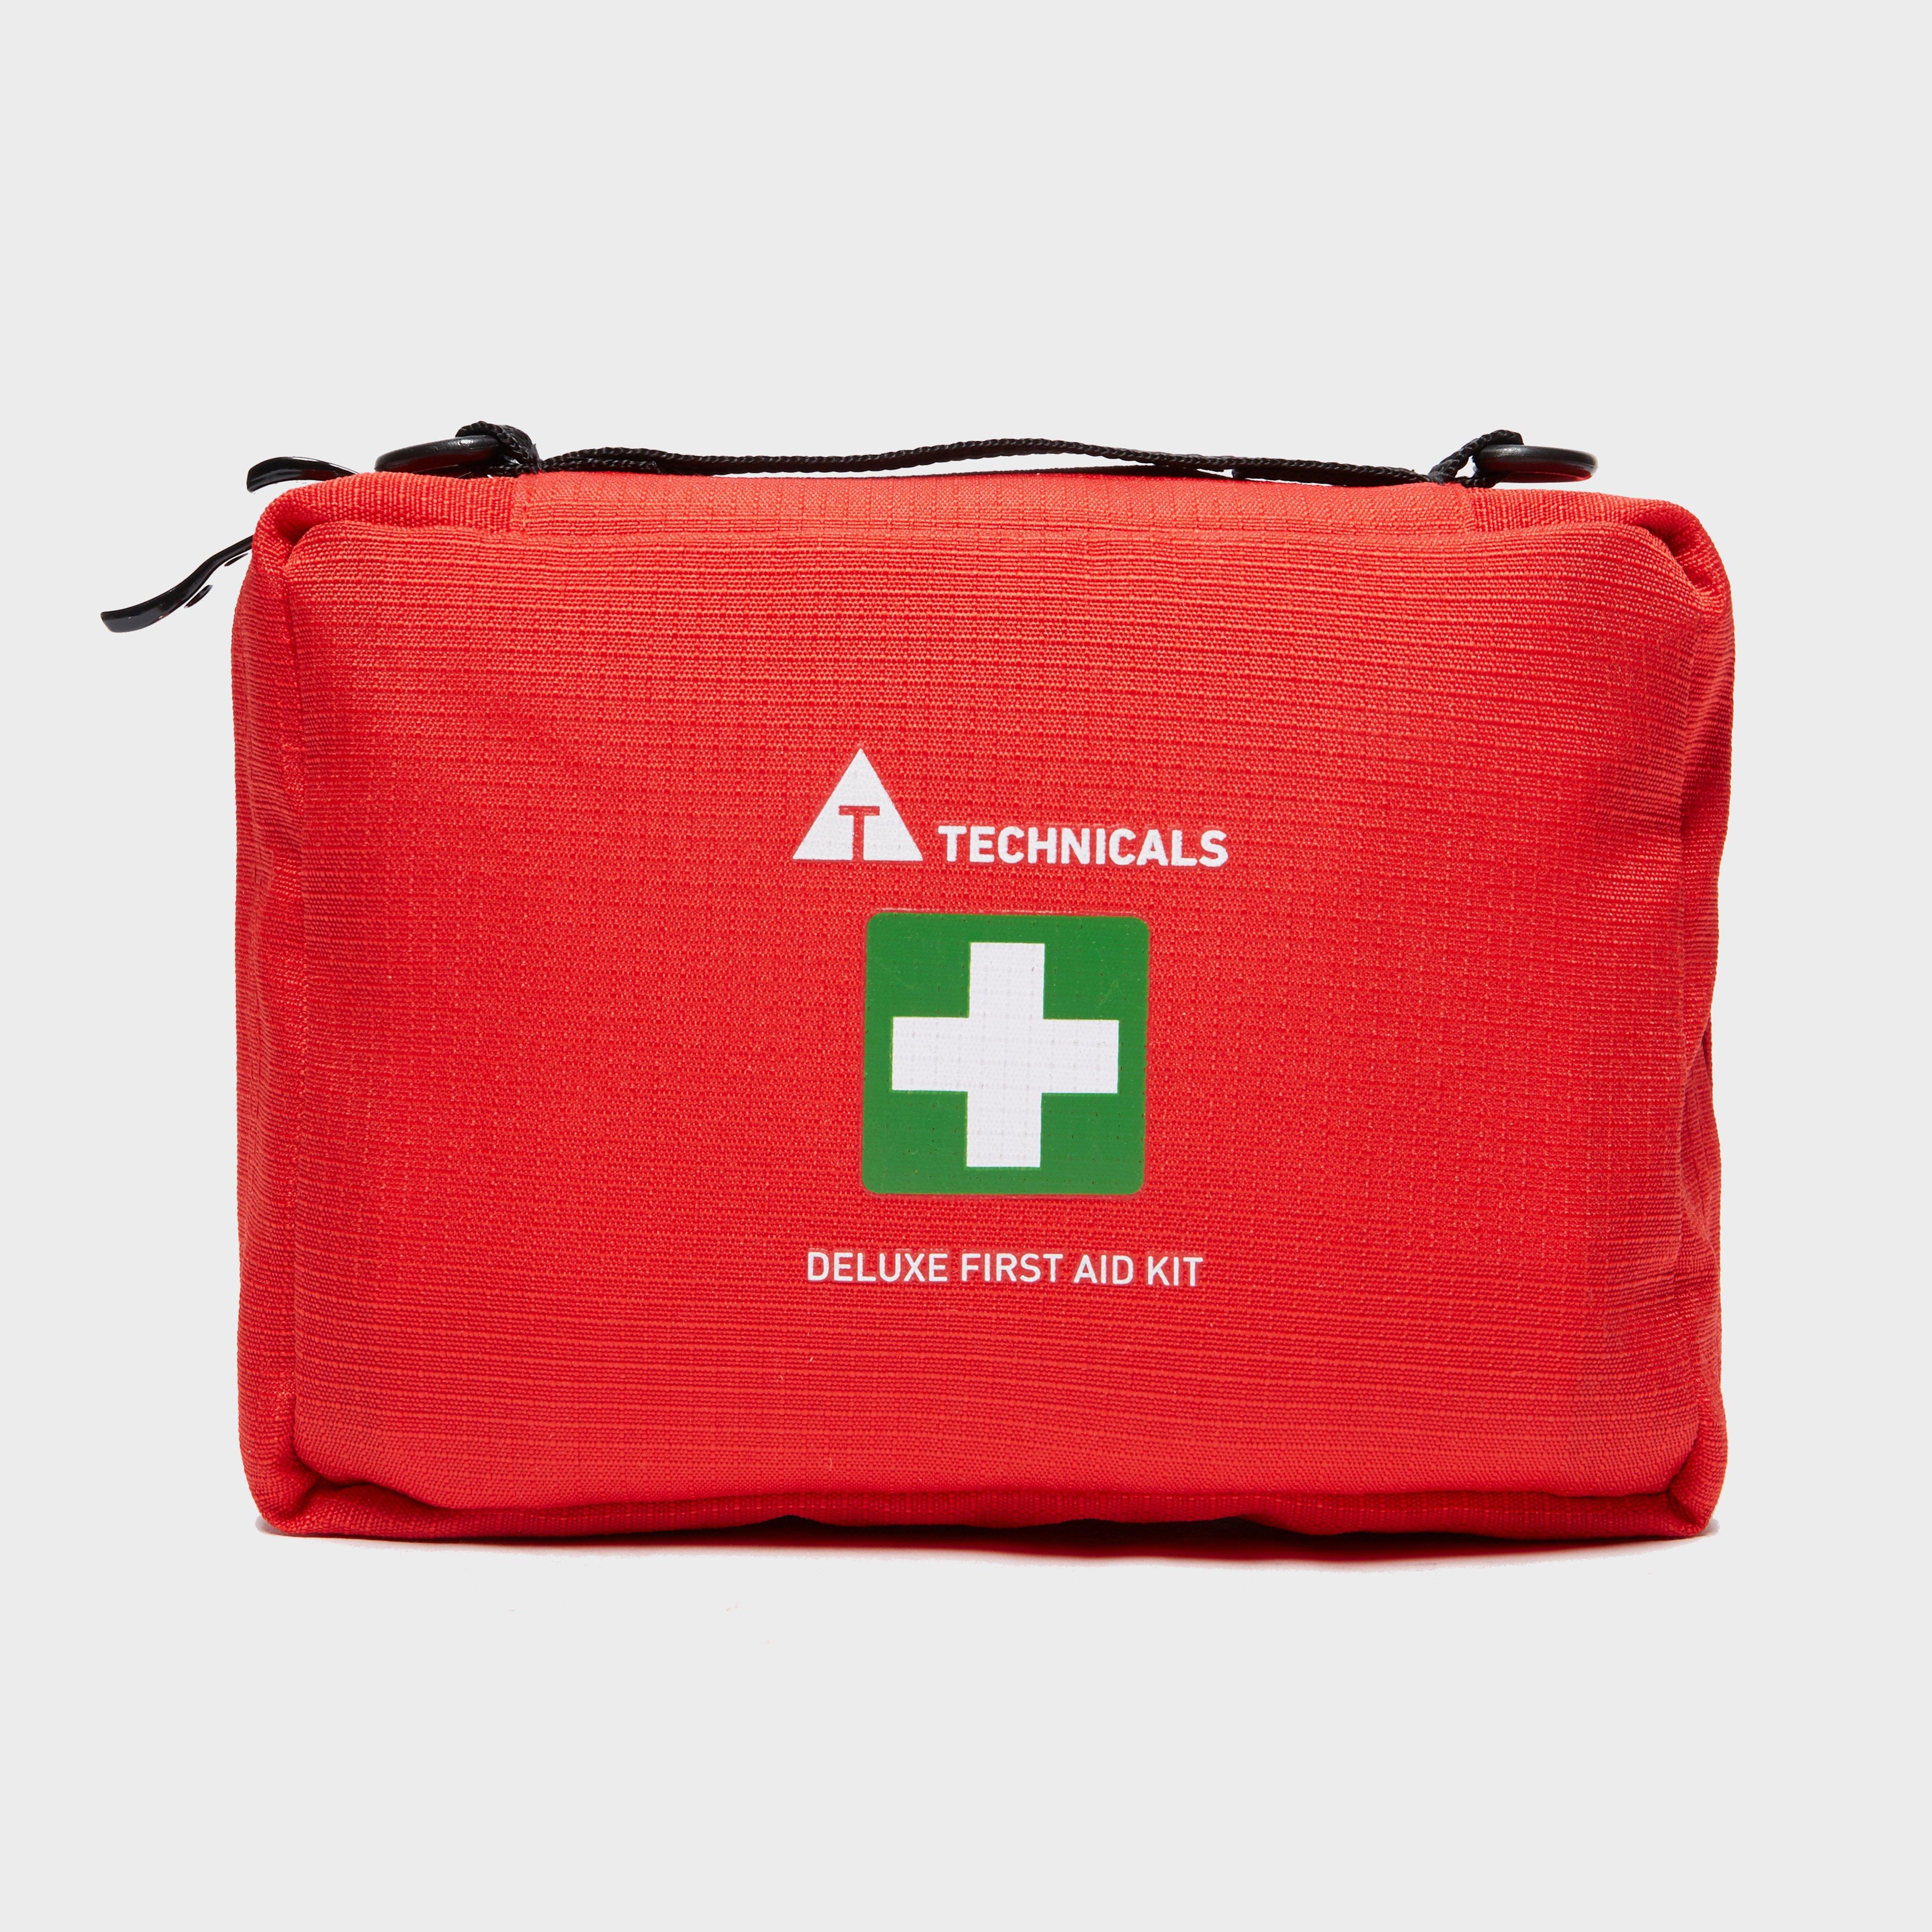 Technicals Deluxe First Aid Kit - Red/red  Red/red